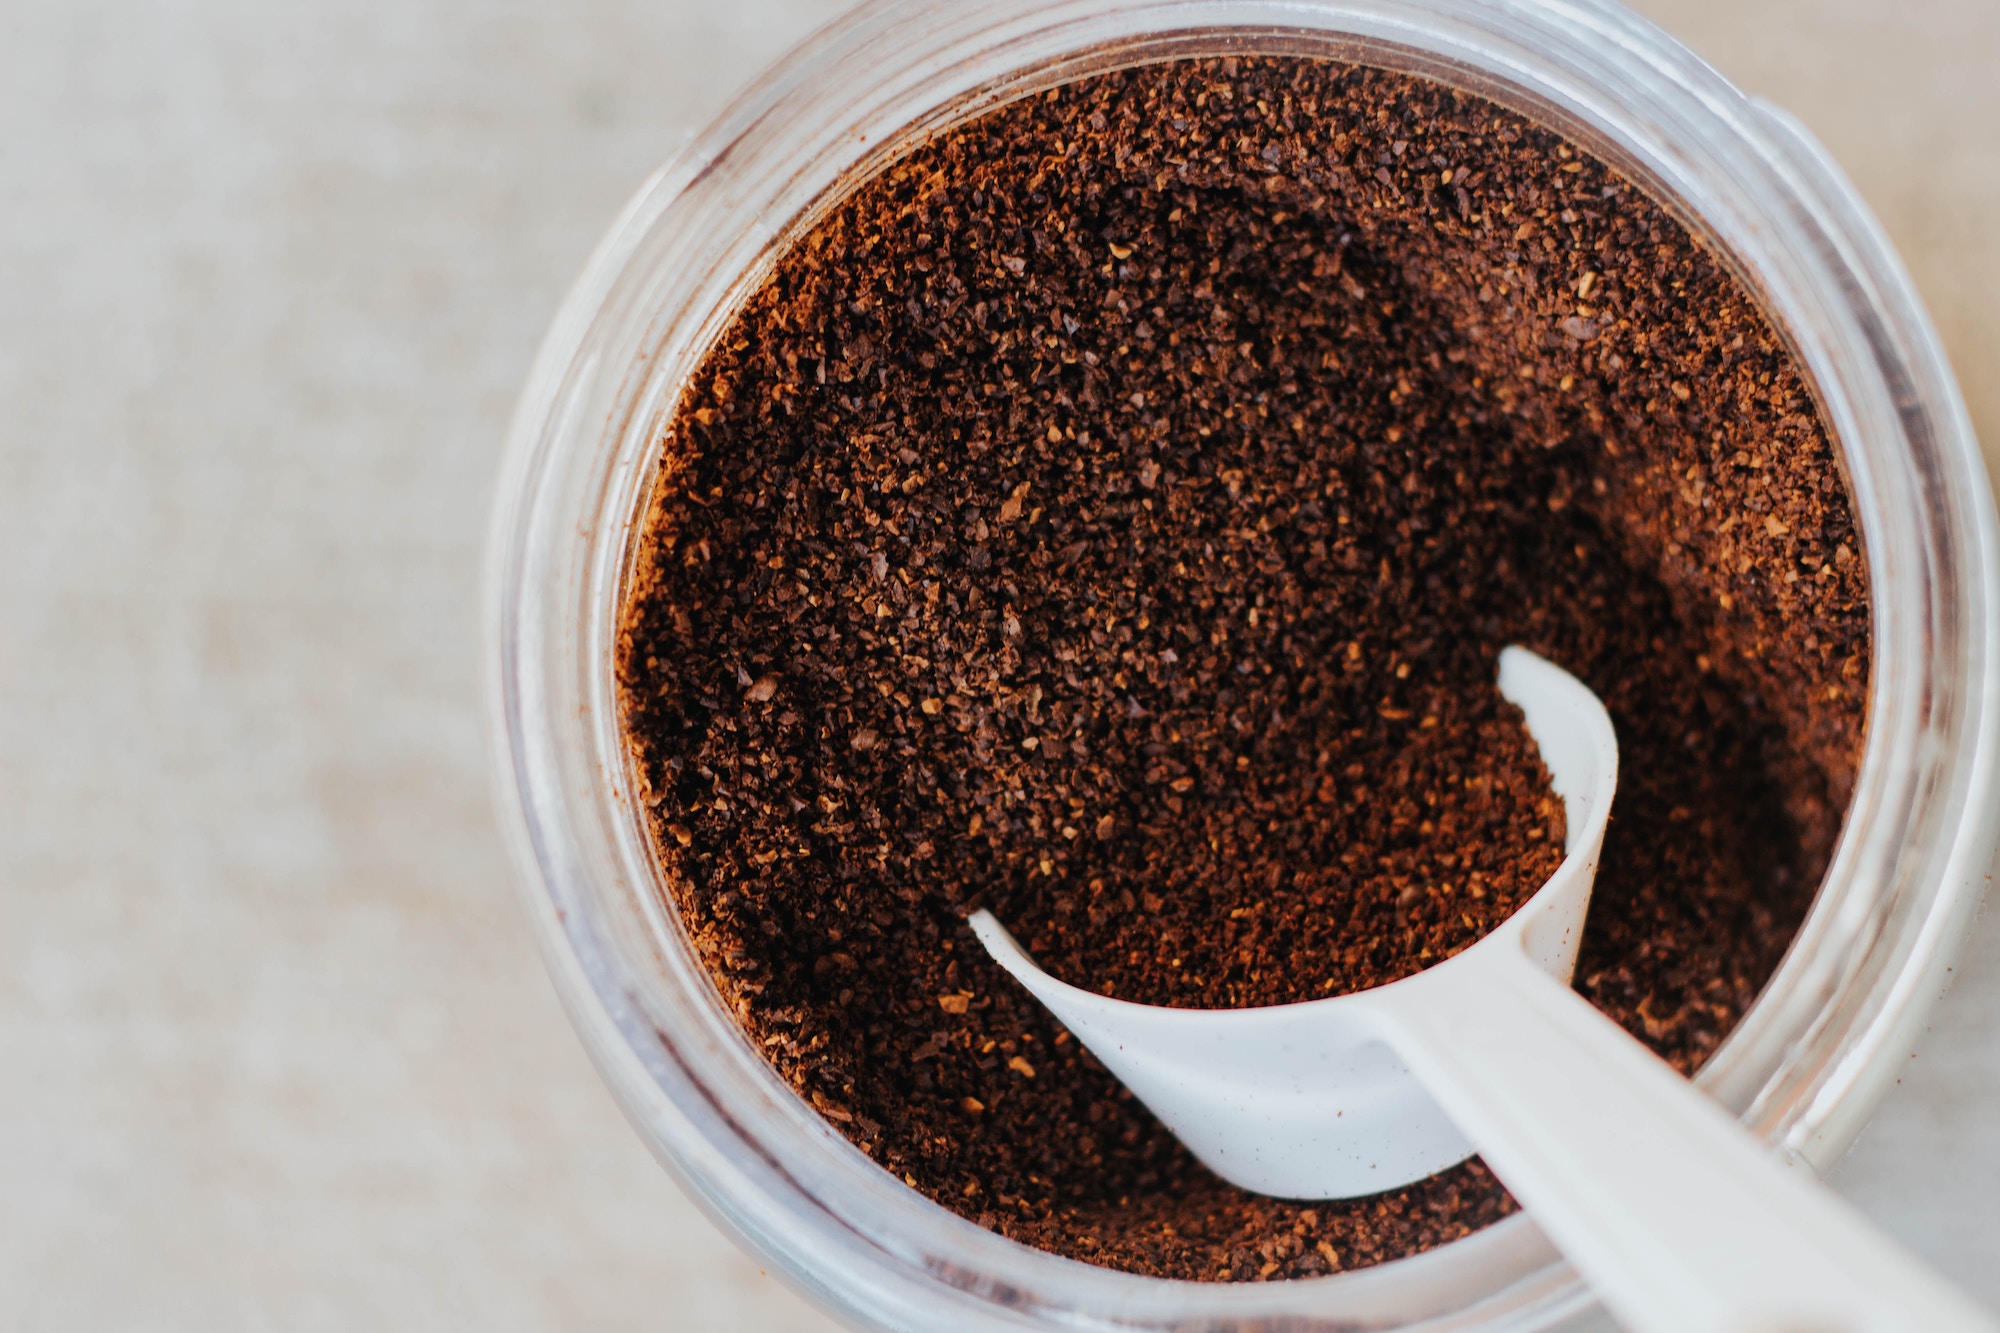 What to do with coffee grounds? 3 ways to reuse coffee waste